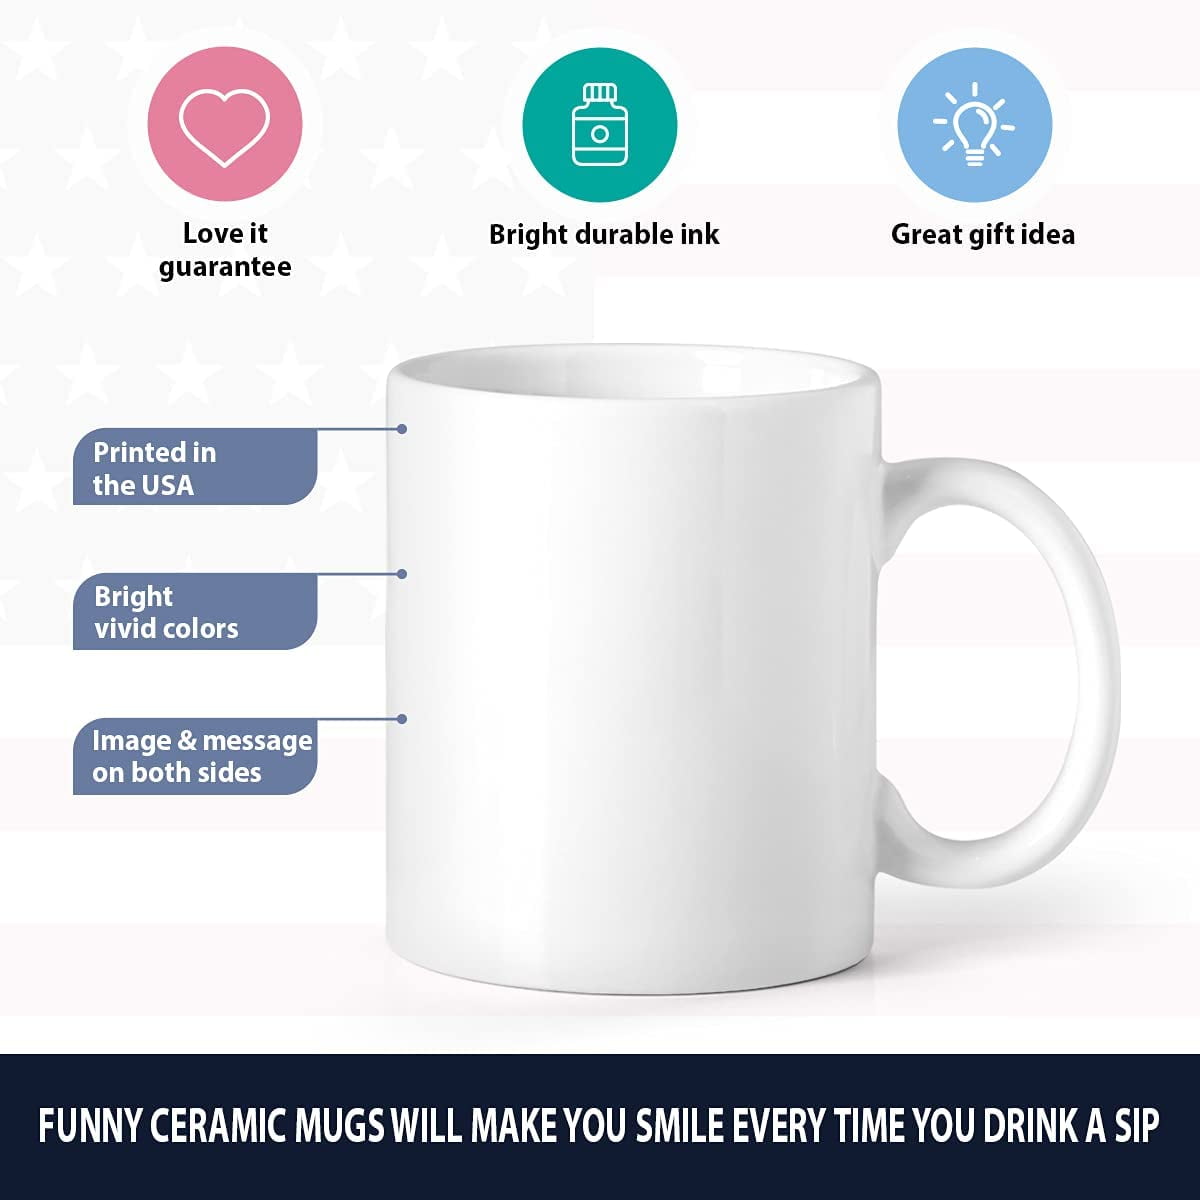 First I Drink The Coffee Then I Design Your Space - Engraved Stainless  Tumbler Gift, Gifts For Her, Interior Designer Mug